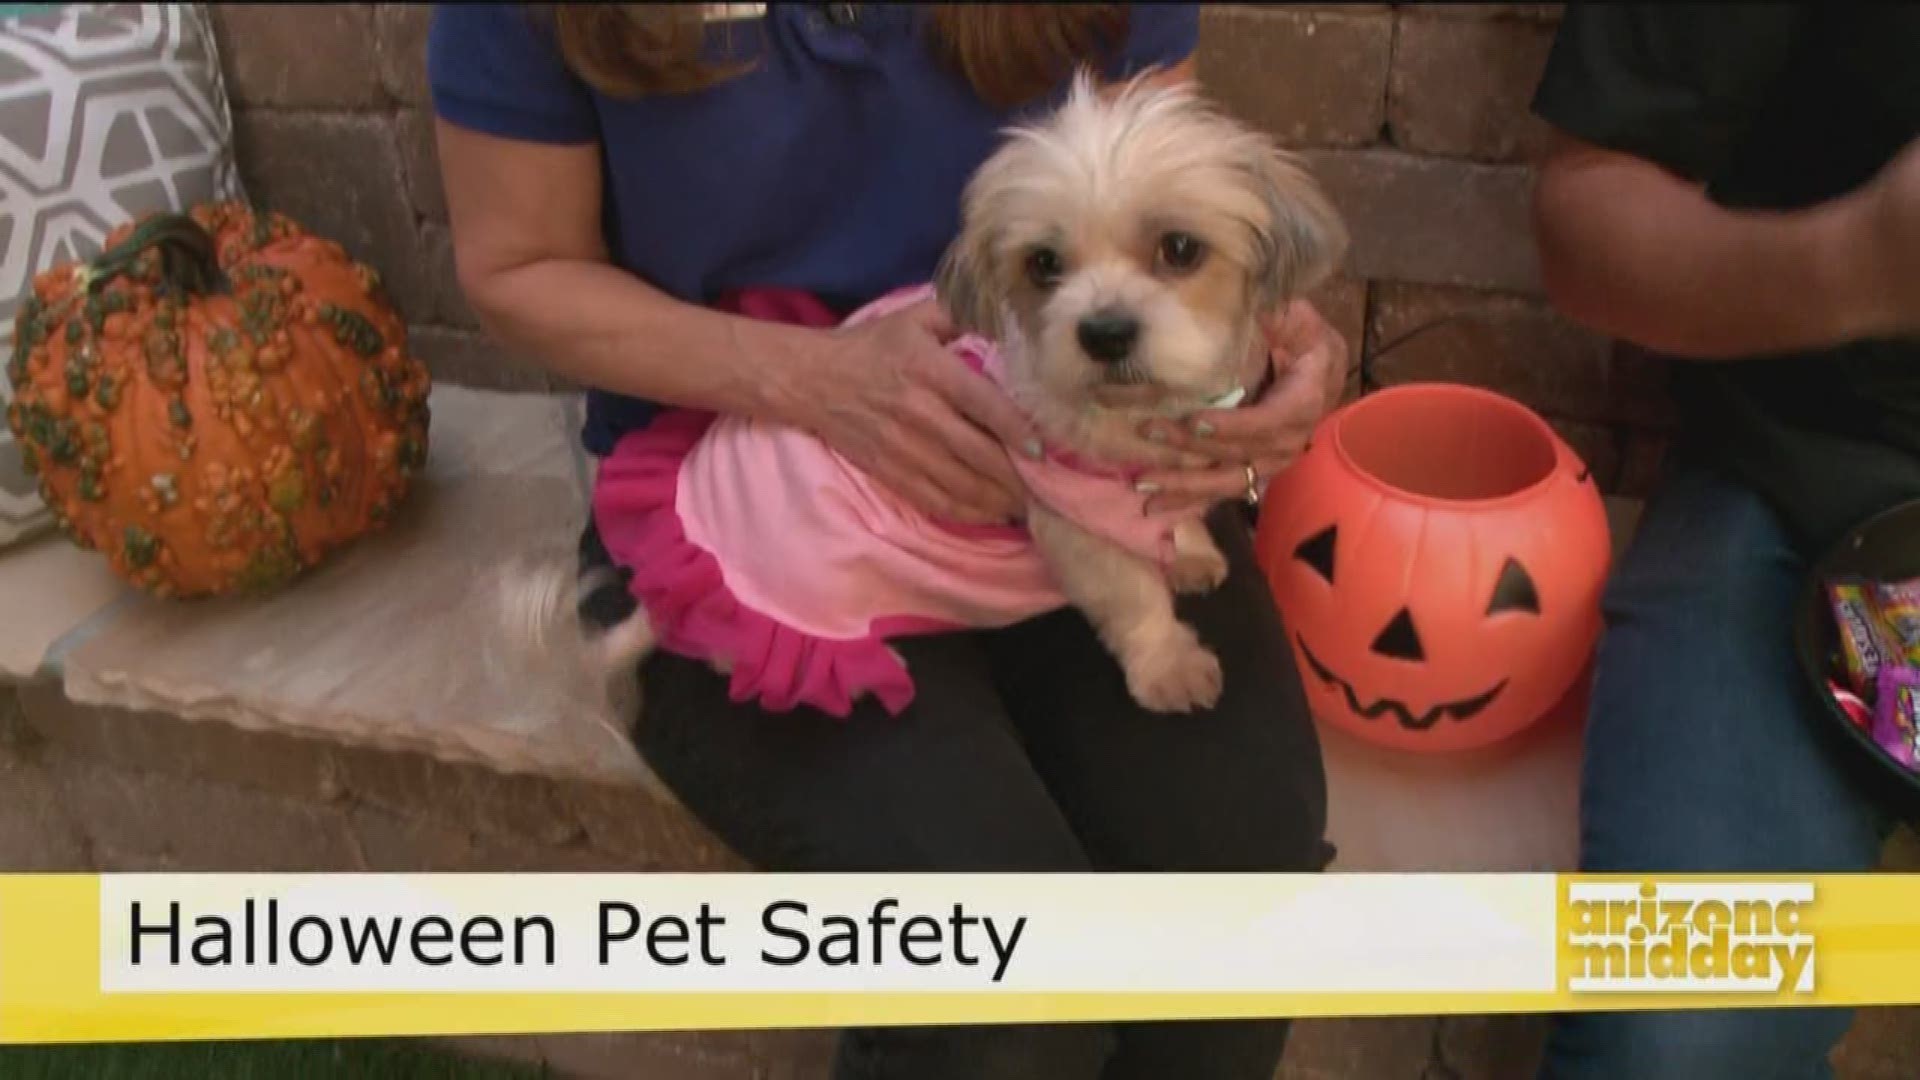 Pet experts Janine and Travis give us top tips on how to keep your furry friend safe during Halloween festivities